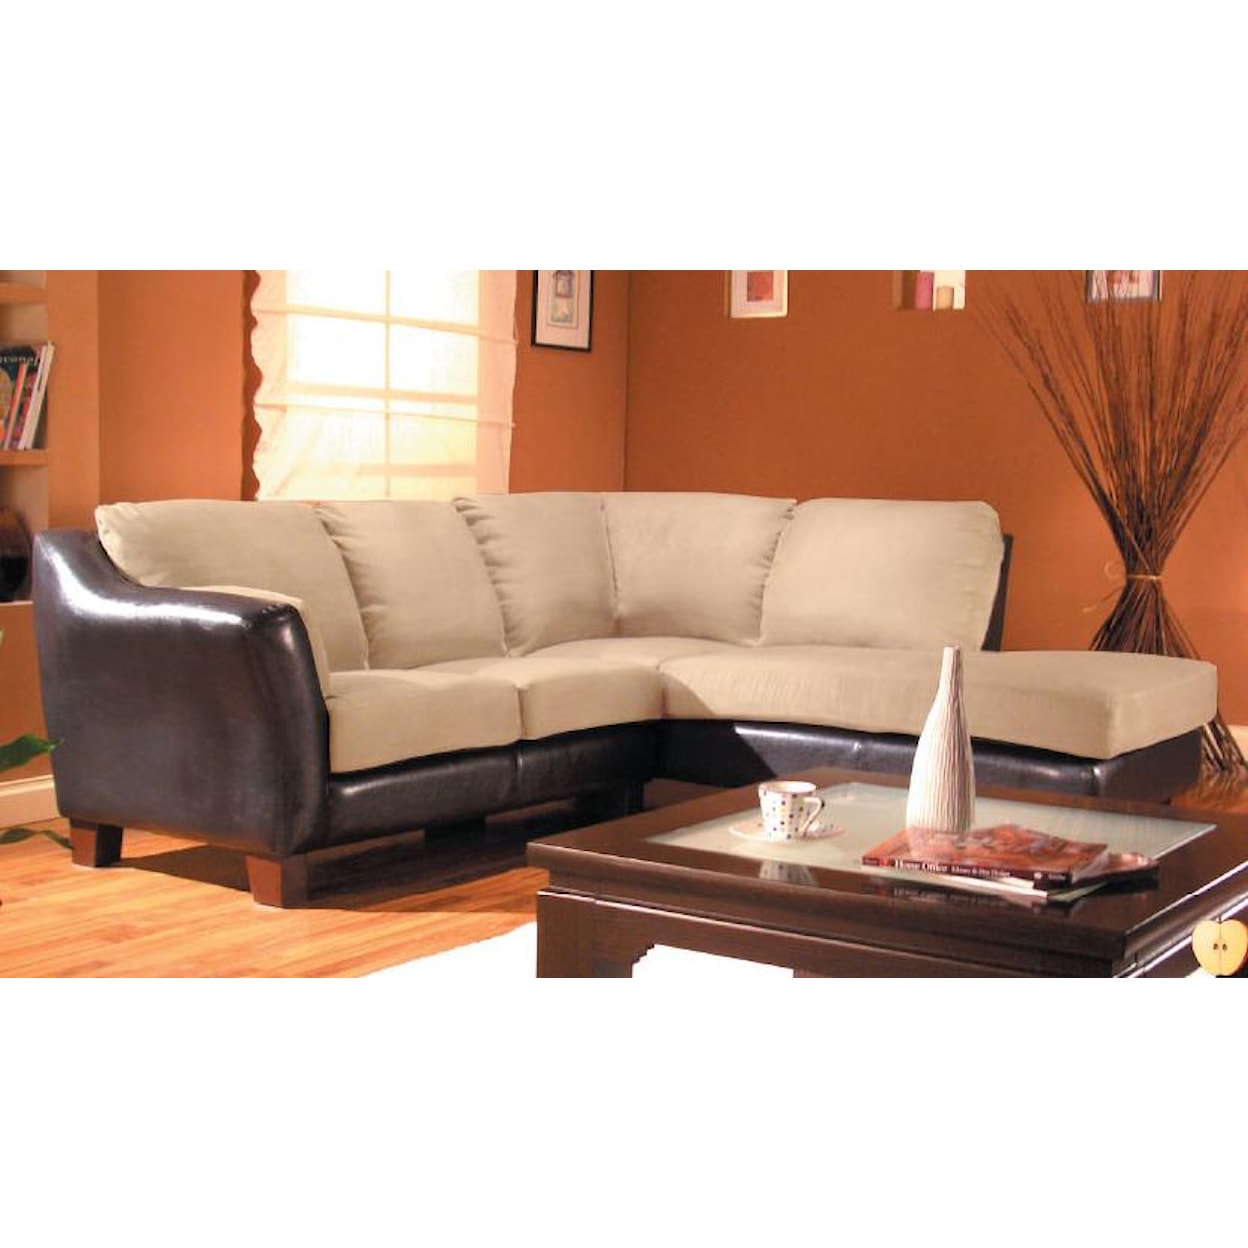 Primo International Durres 2 Piece Sectional